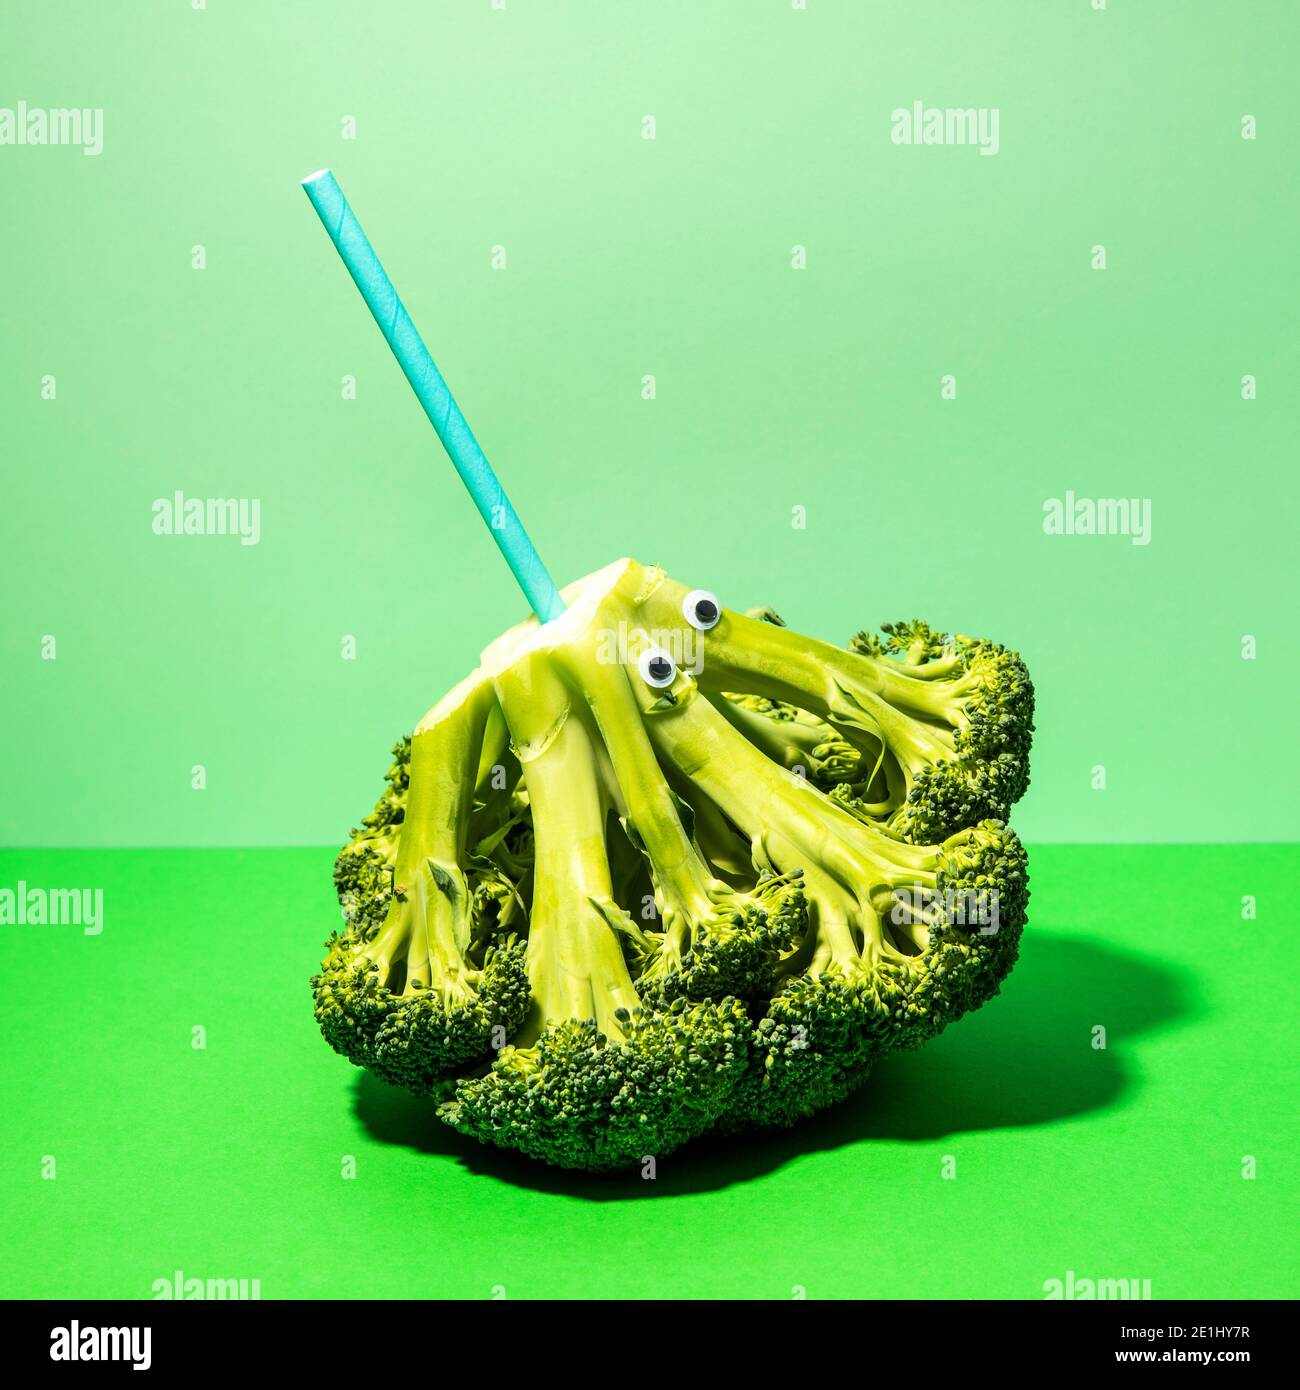 Fun broccoli with eyes and a straw. Stock Photo